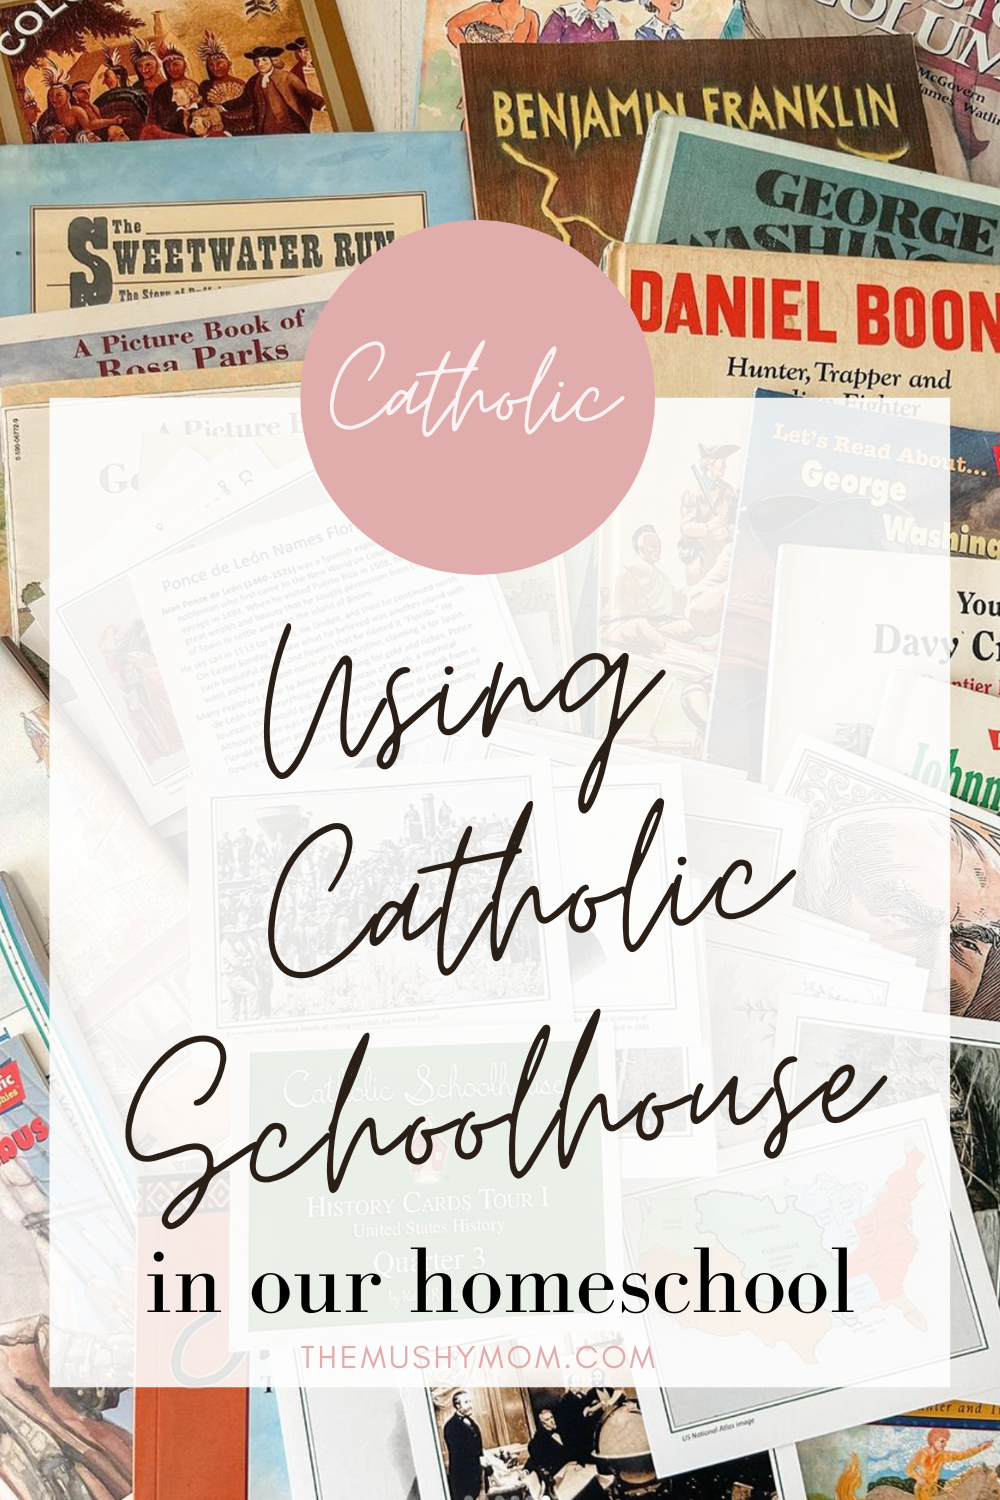 Homeschooling with Catholic Schoolhouse.png